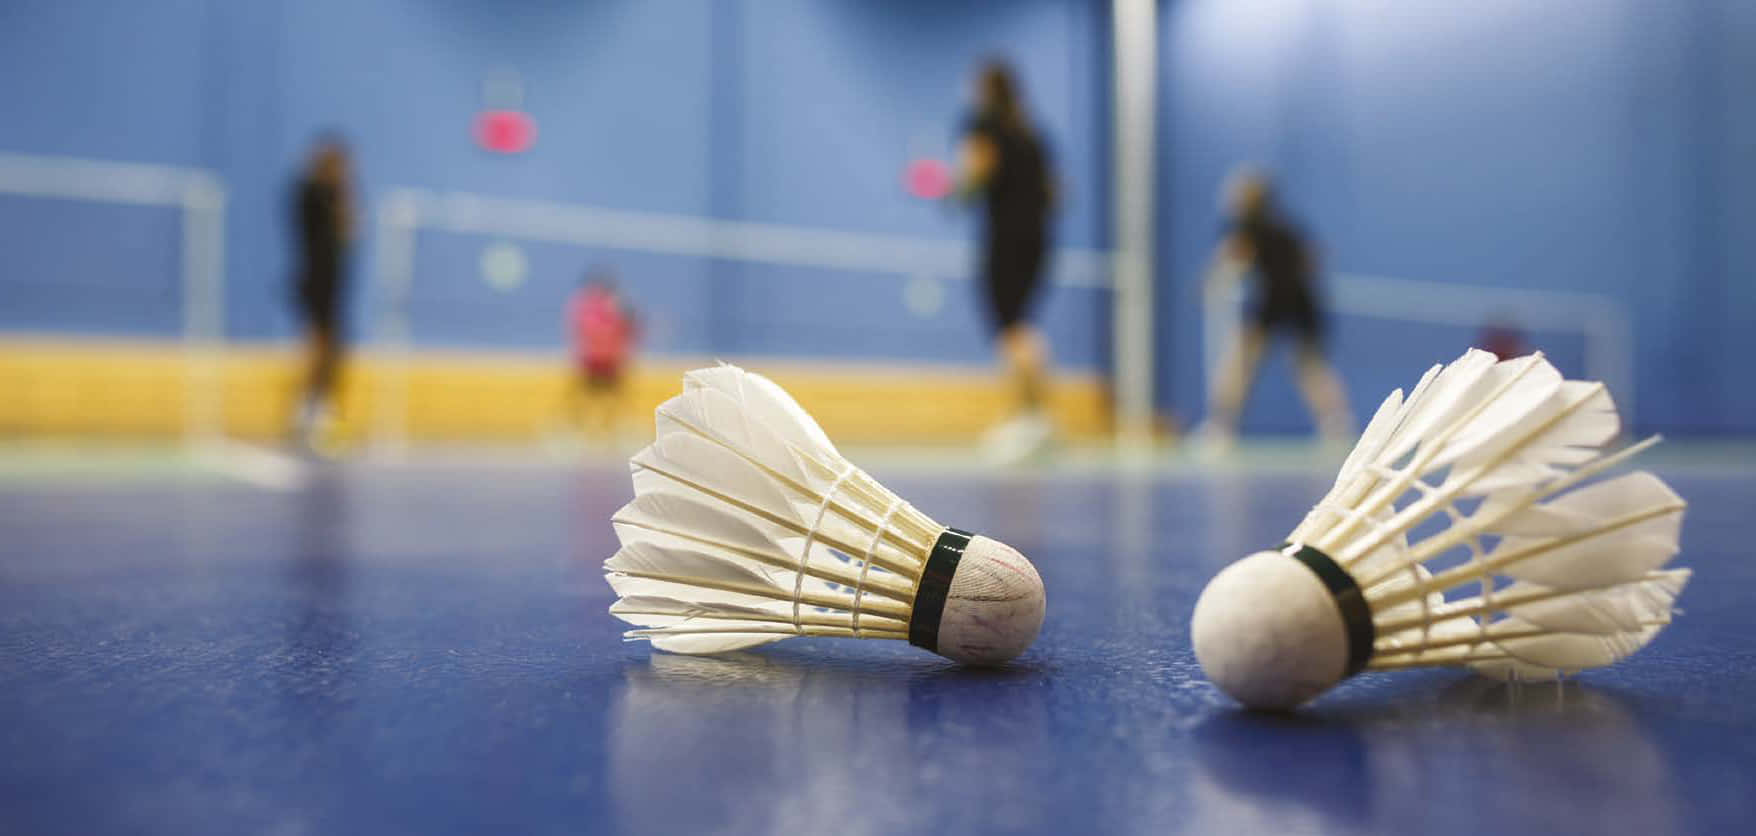 Image  Professional Badminton Players in Action